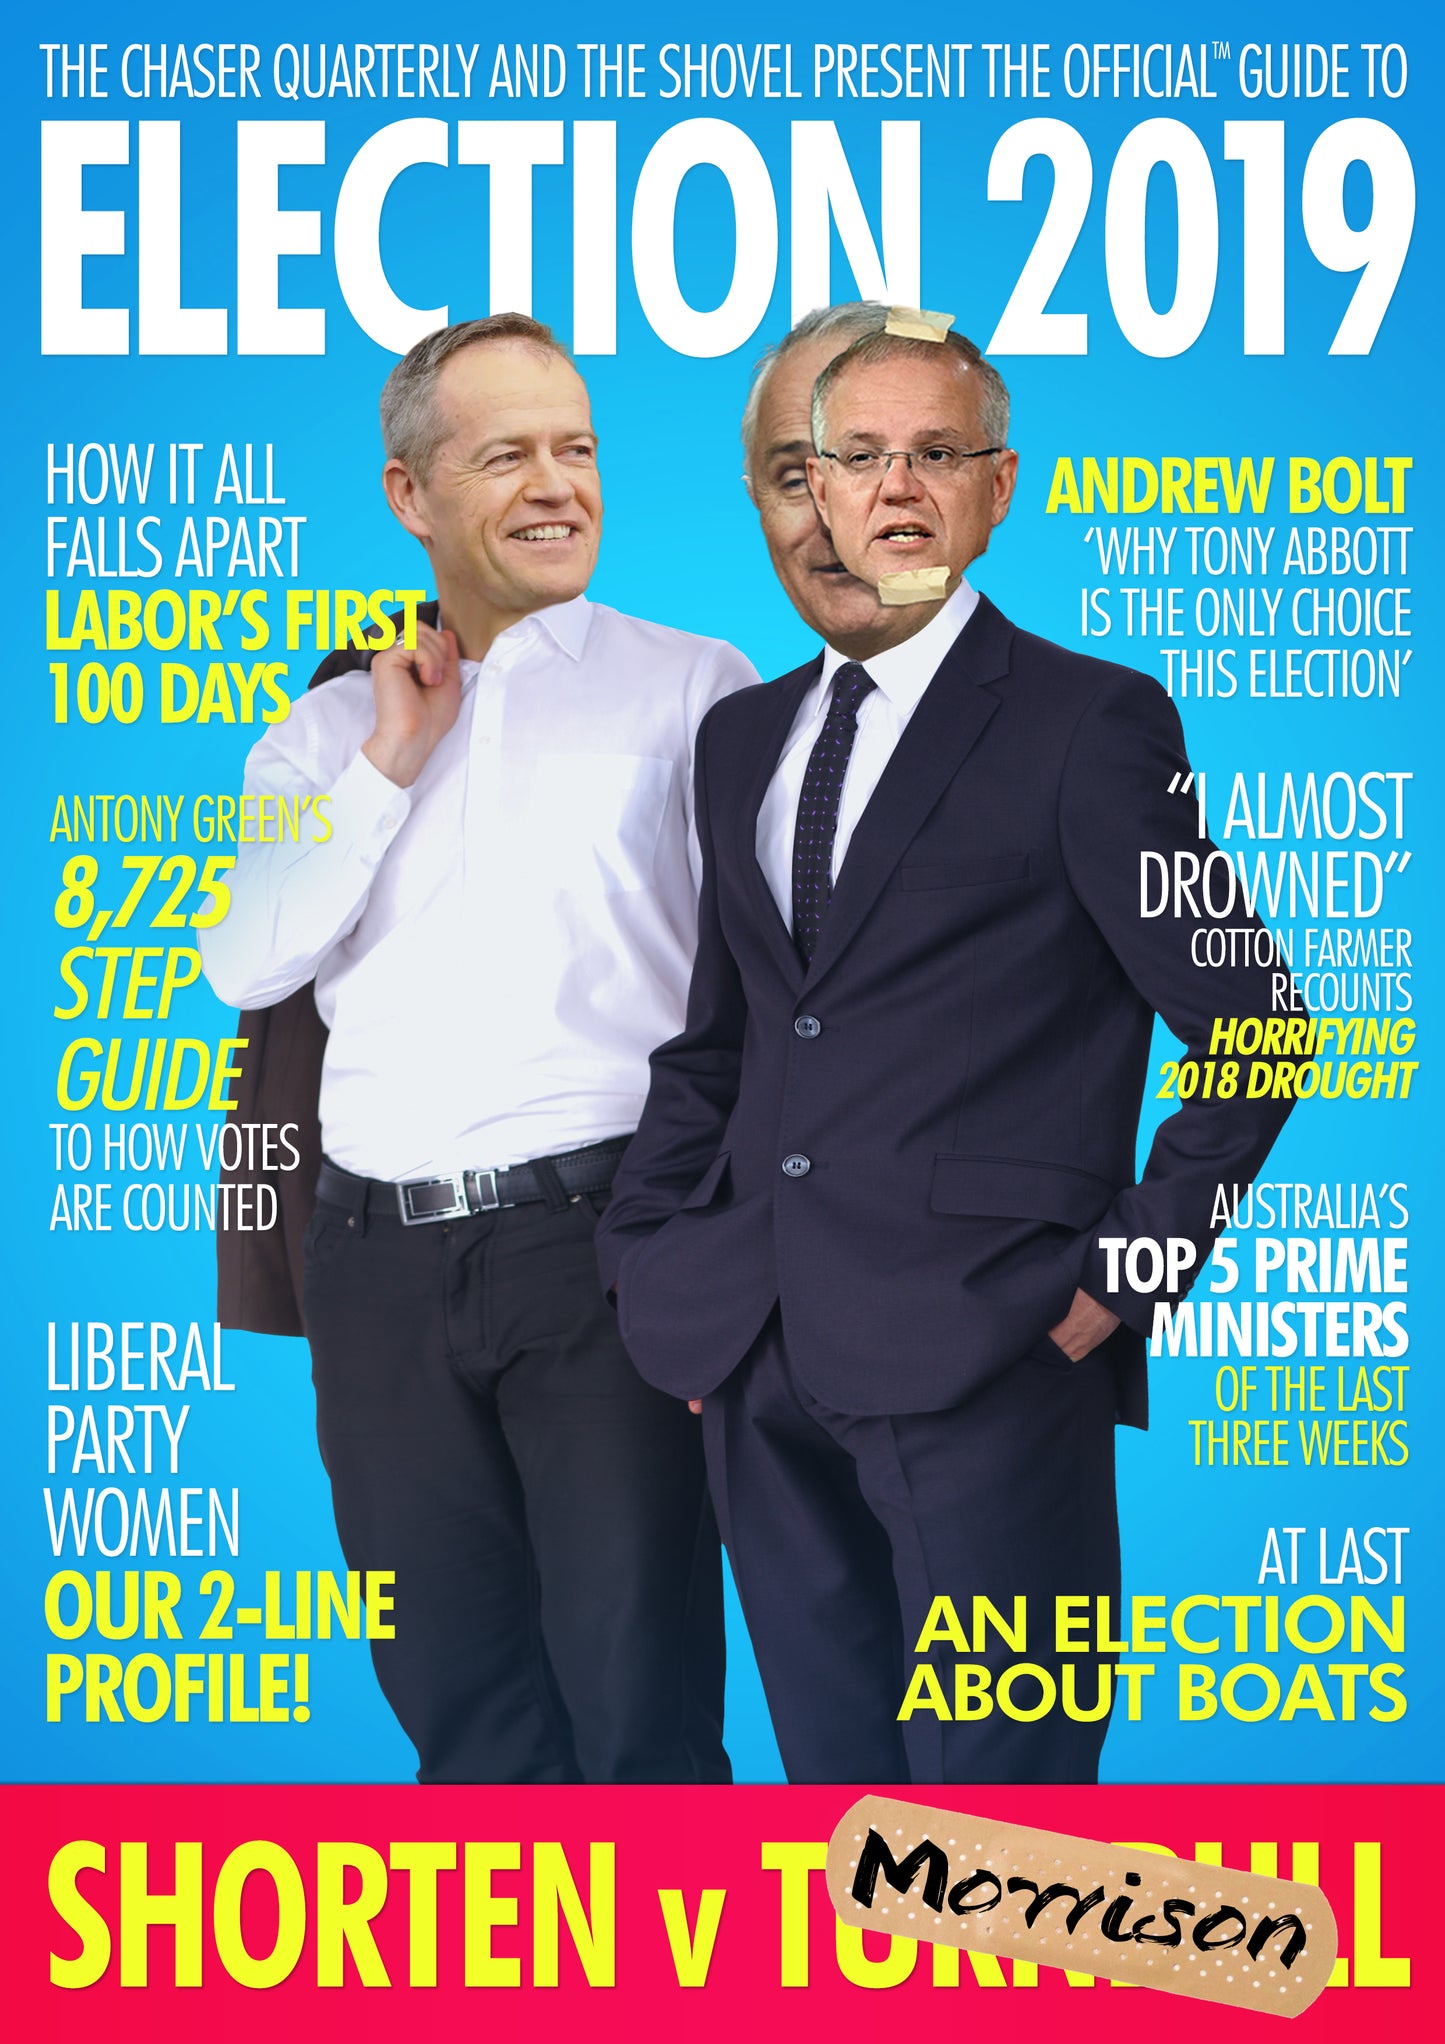 The Official* 2019 Election Guide